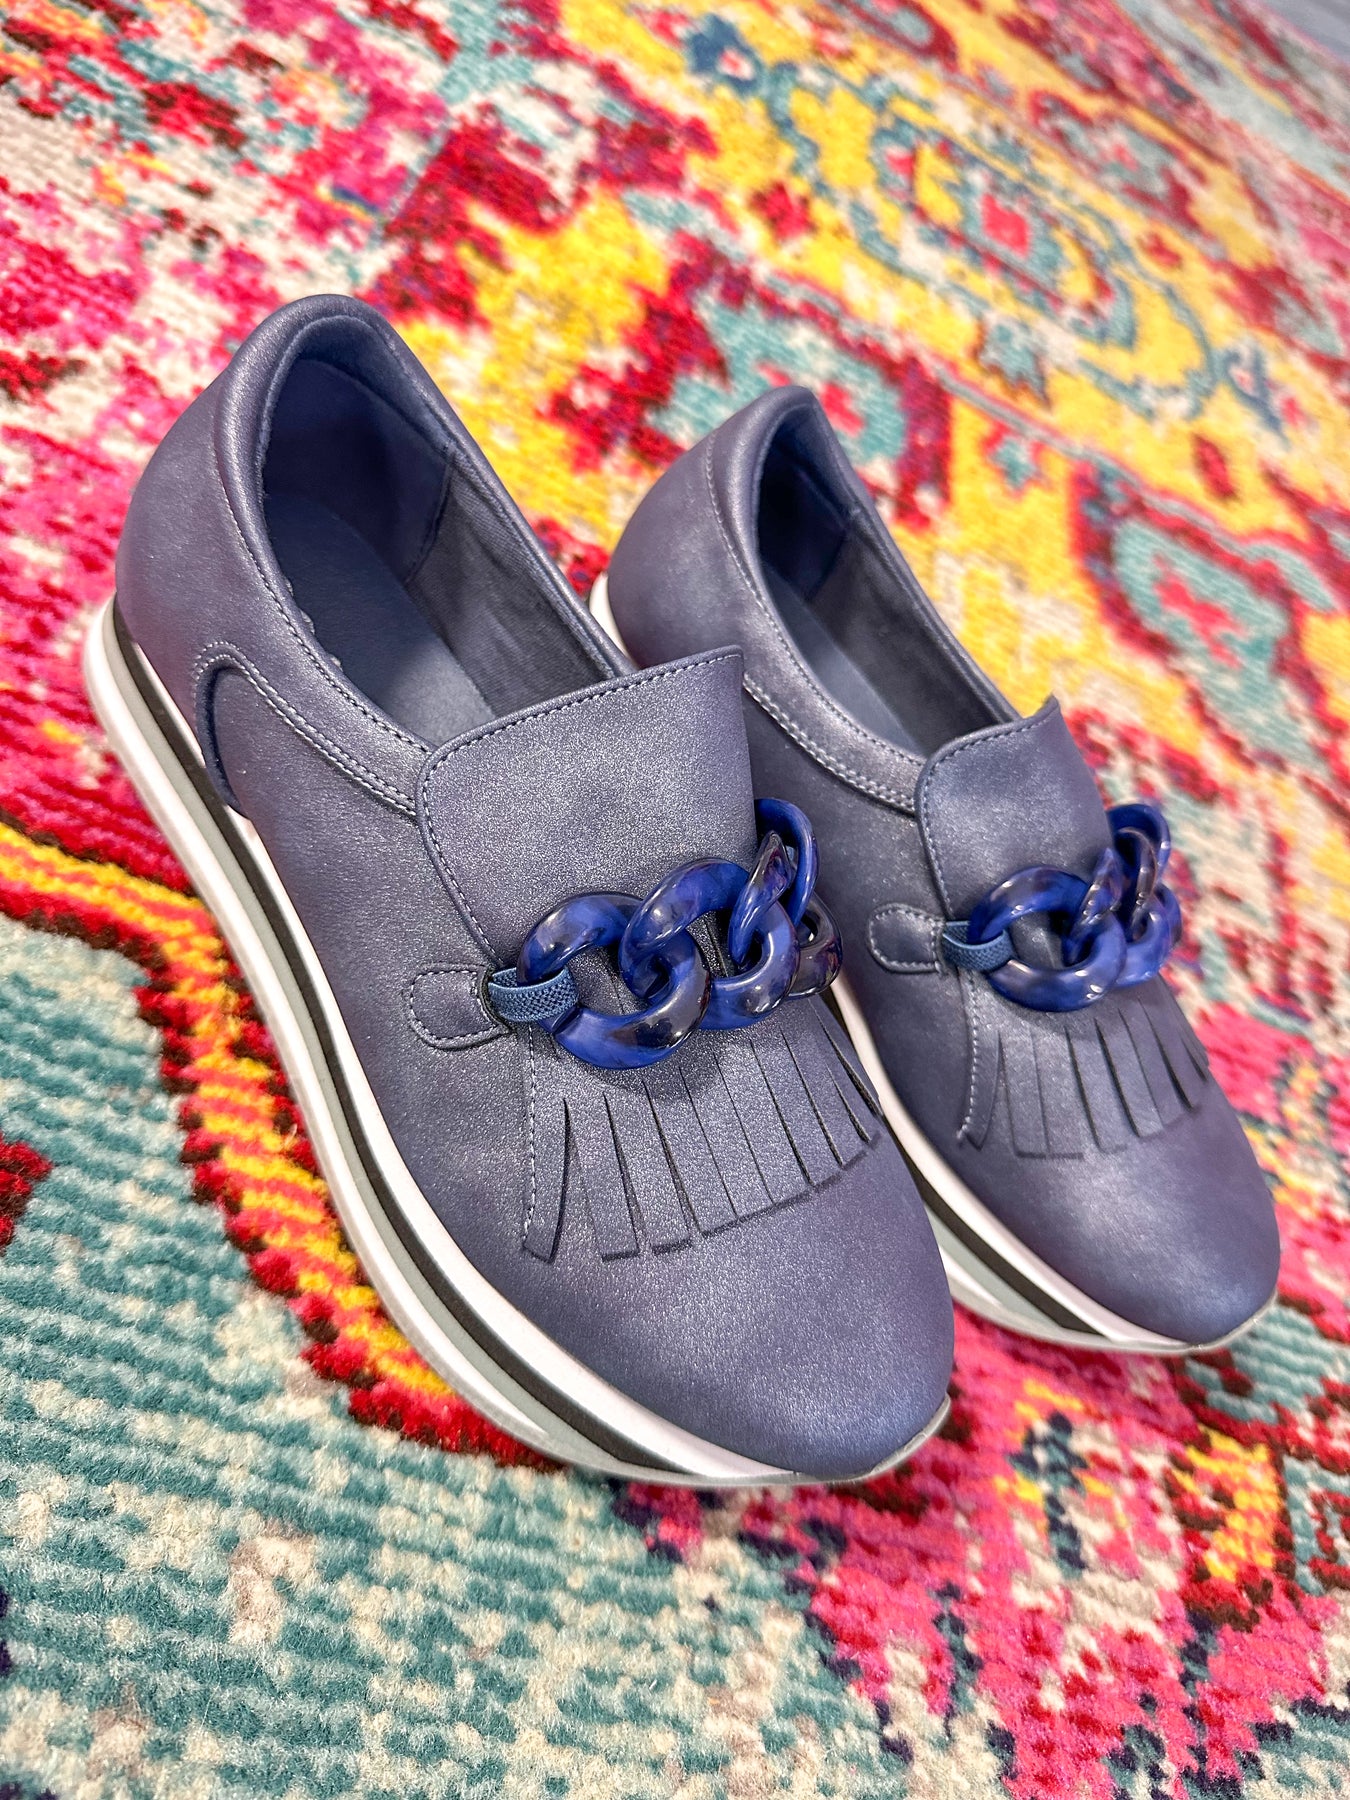 Pictured is a pair of navy blue loafer style shoes. 